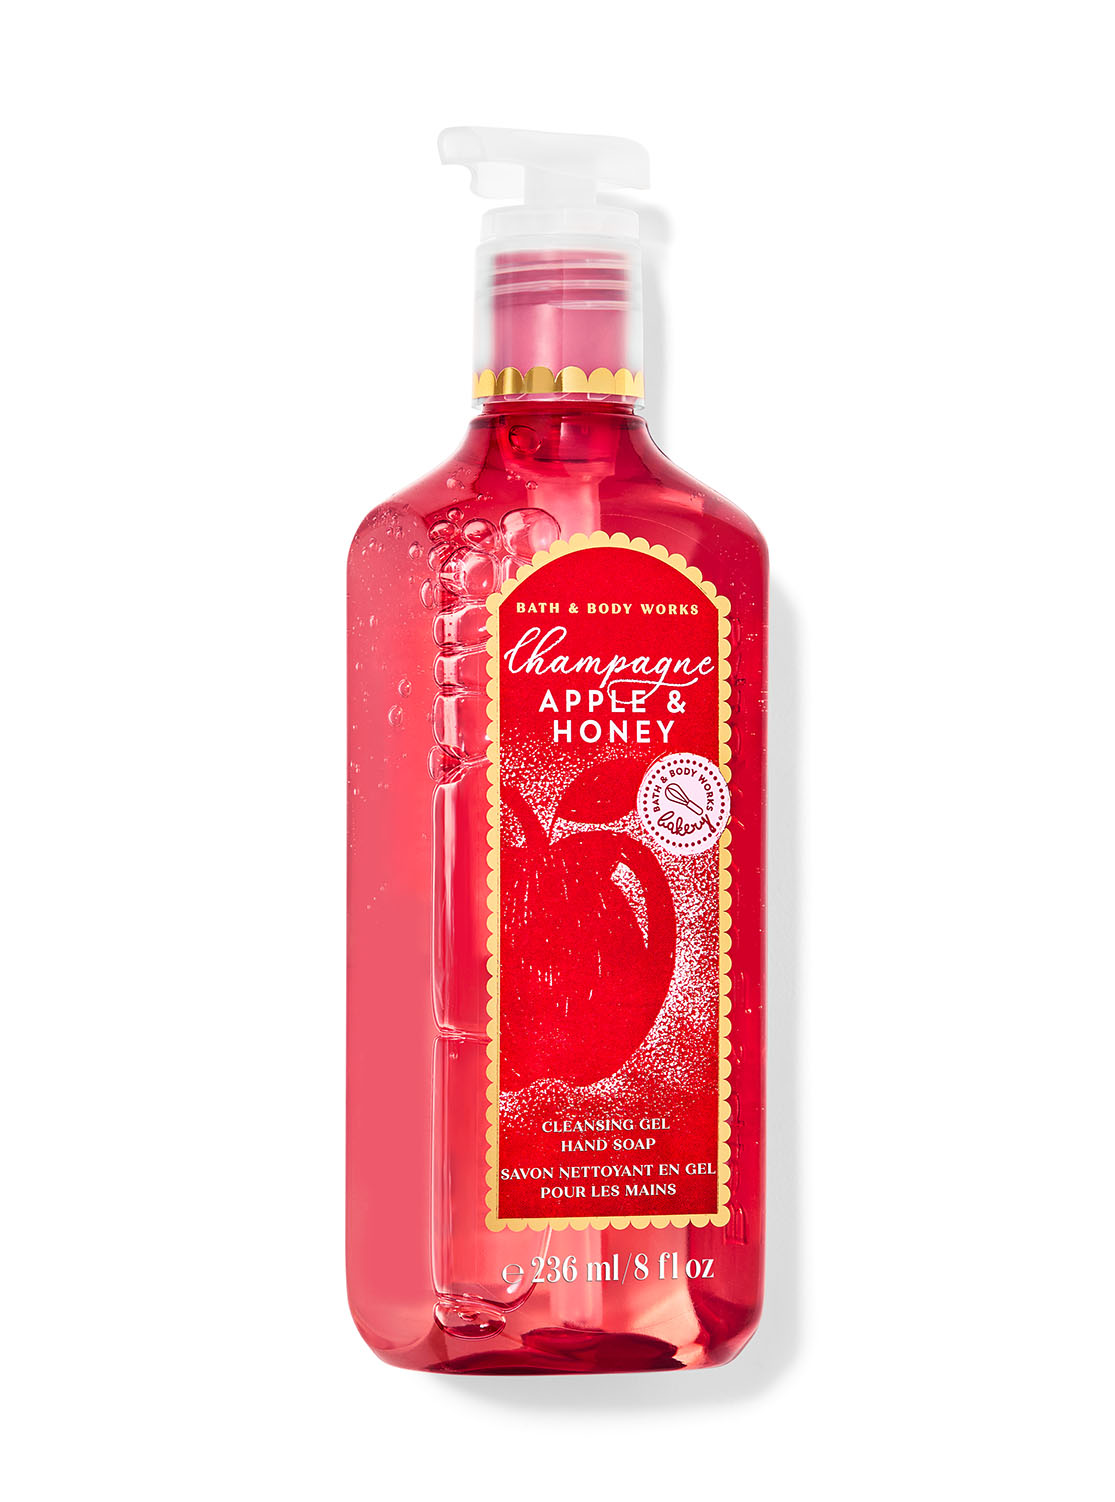 Champagne Apple & Honey Cleansing Gel Hand Soap